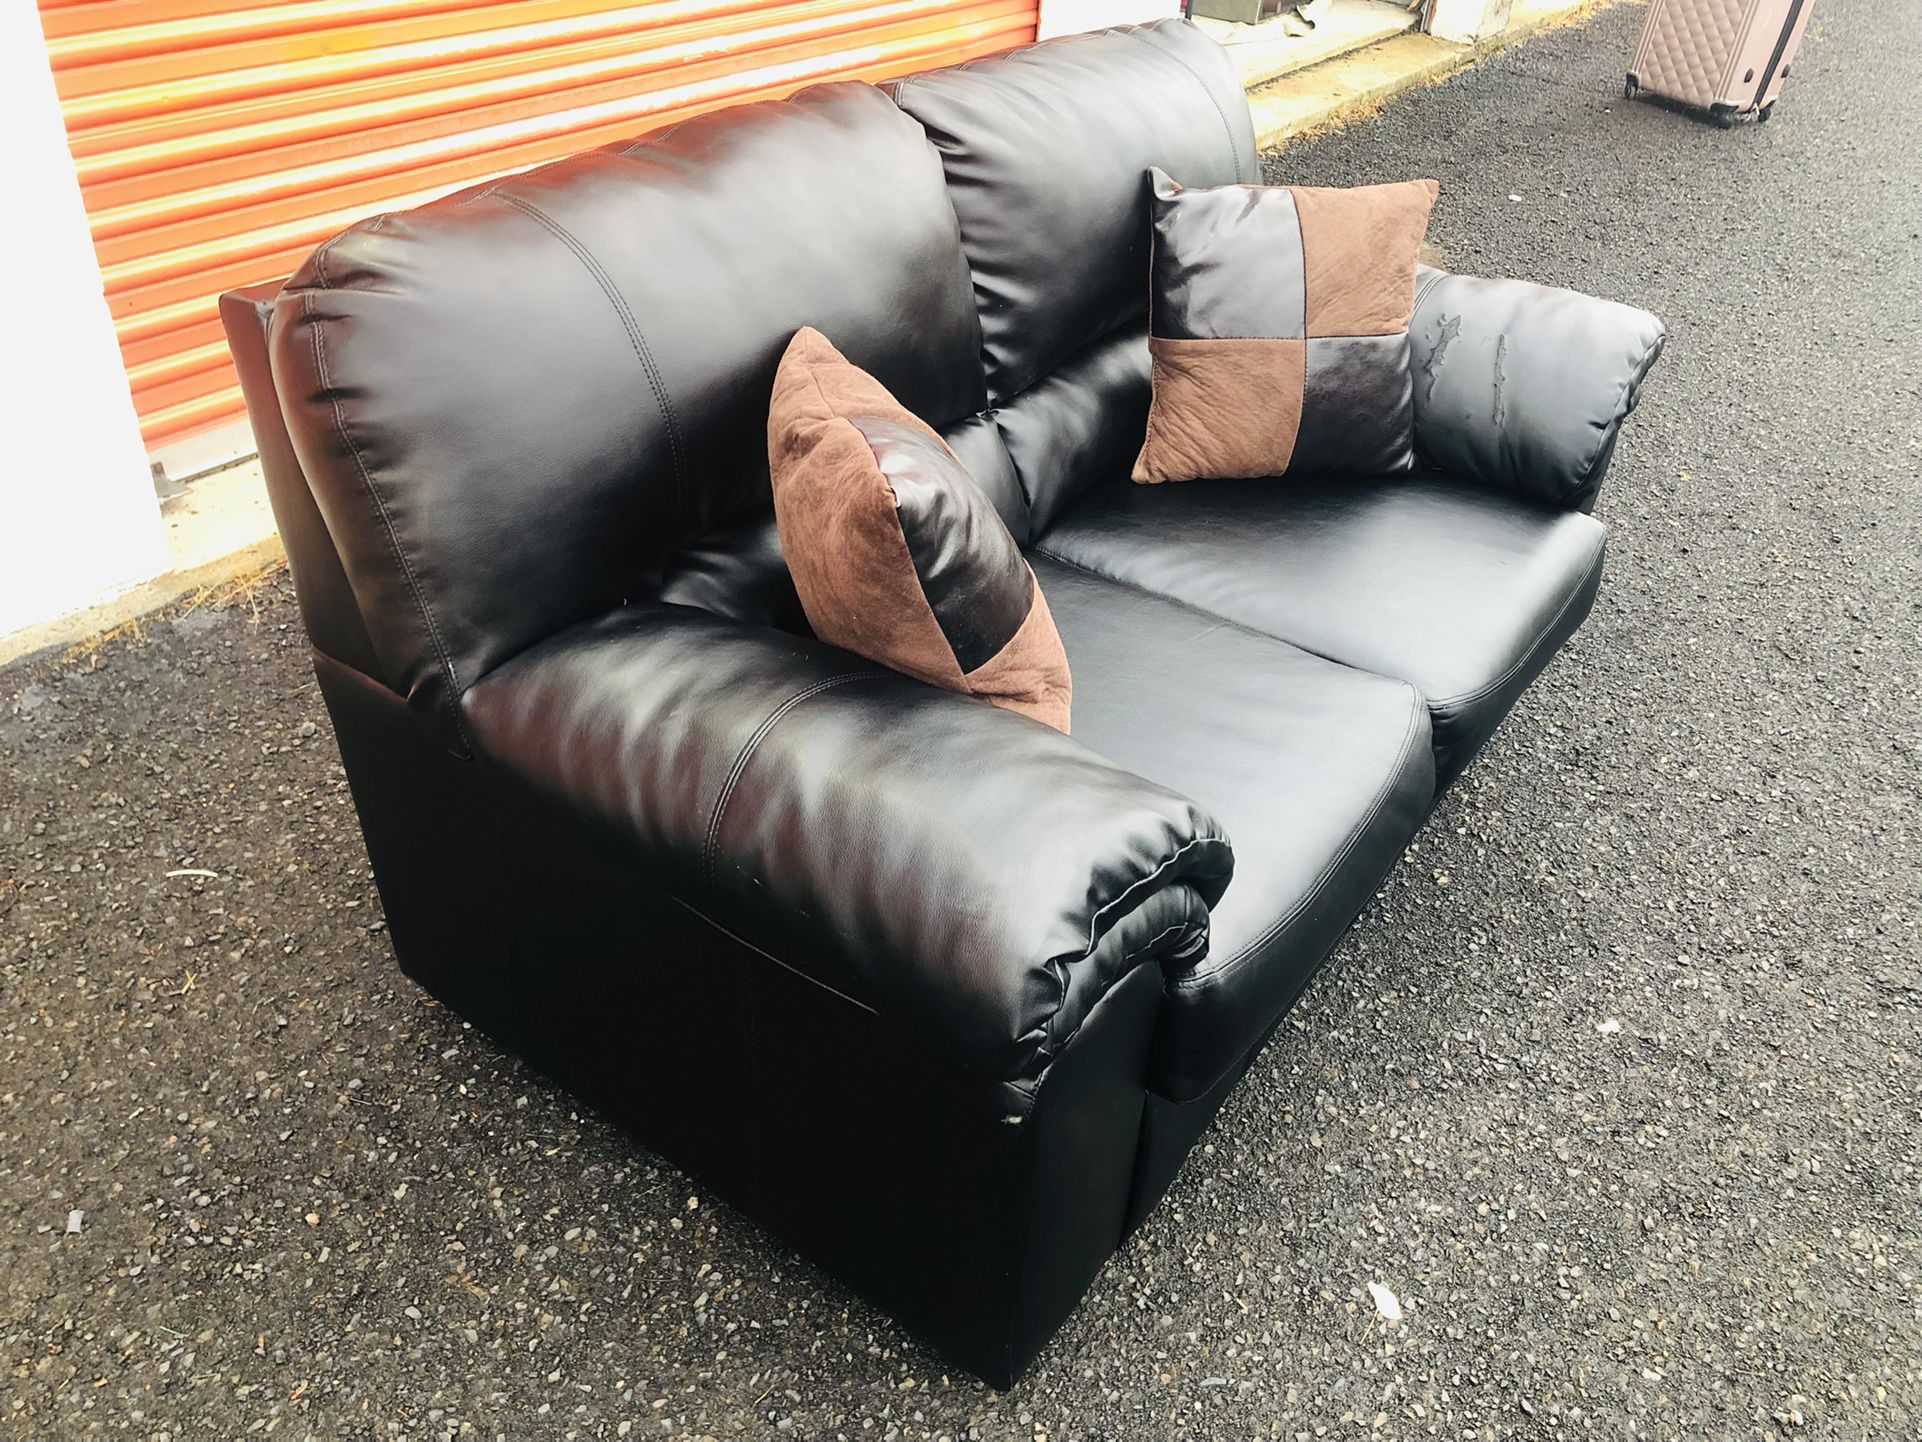 FREE DELIVERY - Ashley Leather Love Seat Black Color - Look My Profile For More Options